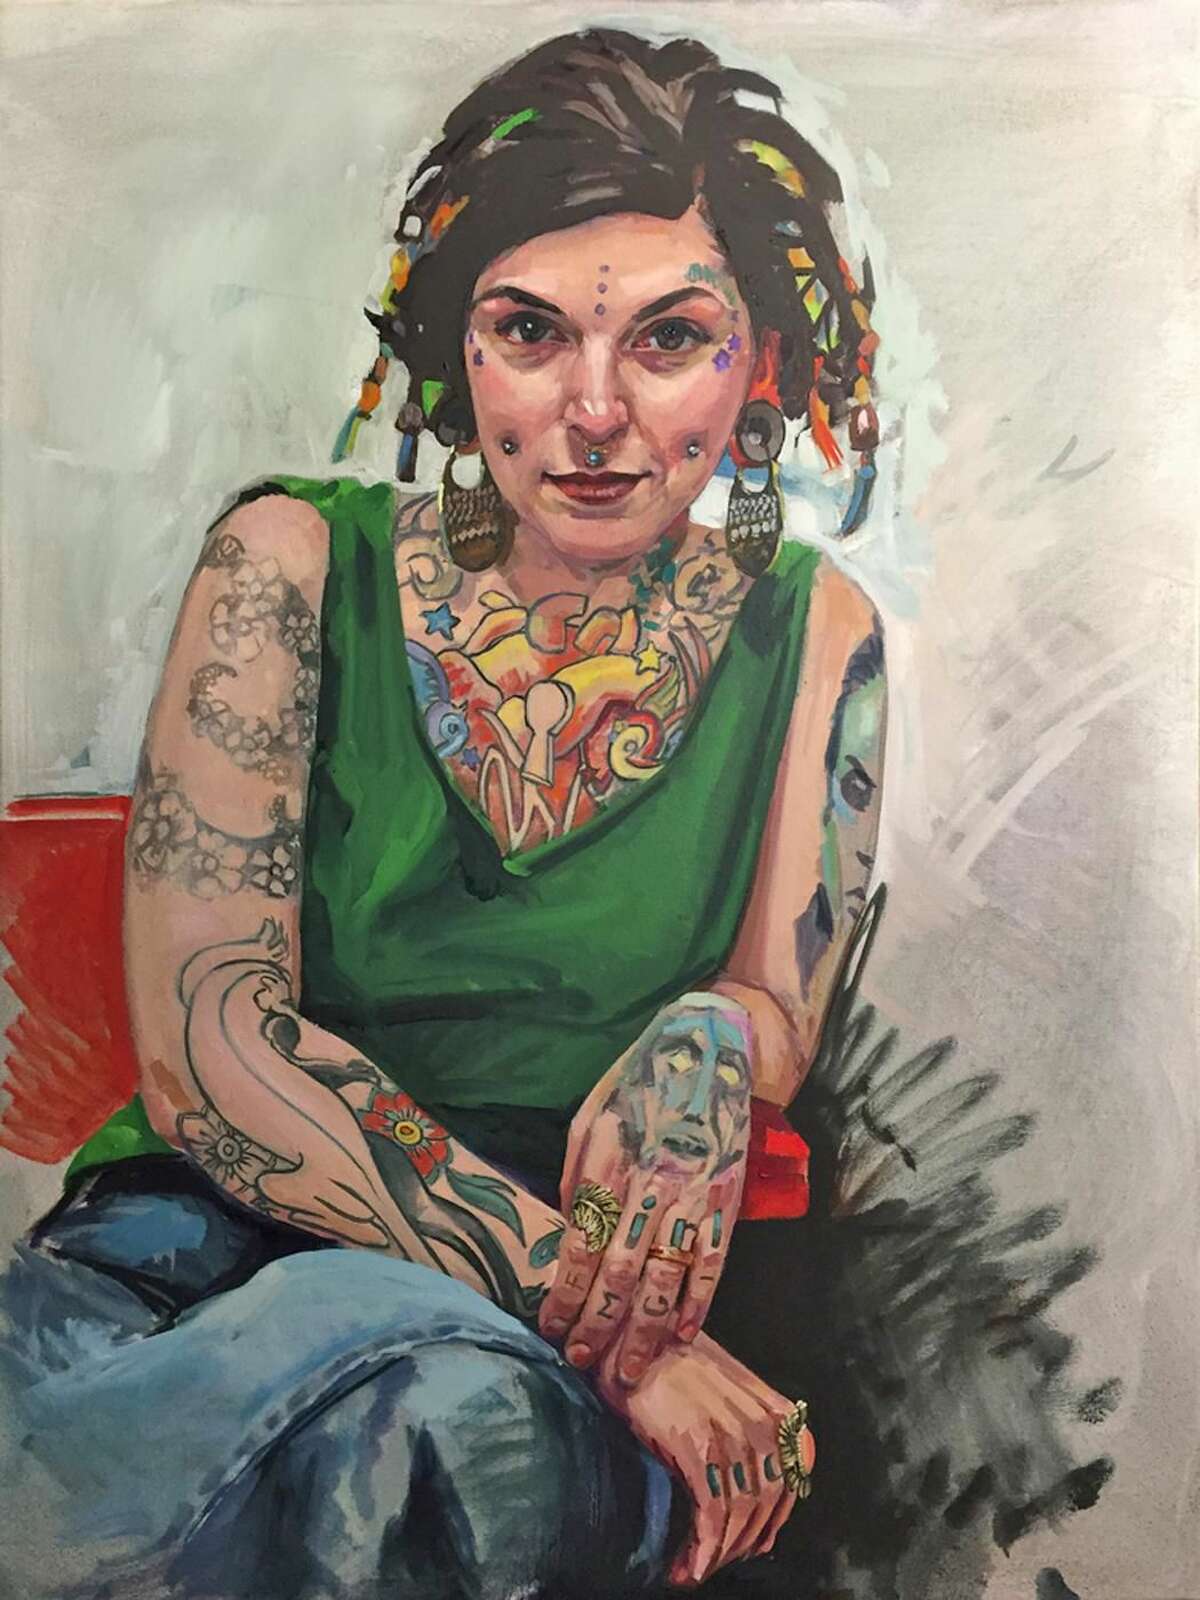 Connecticut artist Brian McClear’s work “Cheryl.” A selection of McClear’s work, “Beyond Surface” will be on display at the Noah Webster Library beginning June 2.